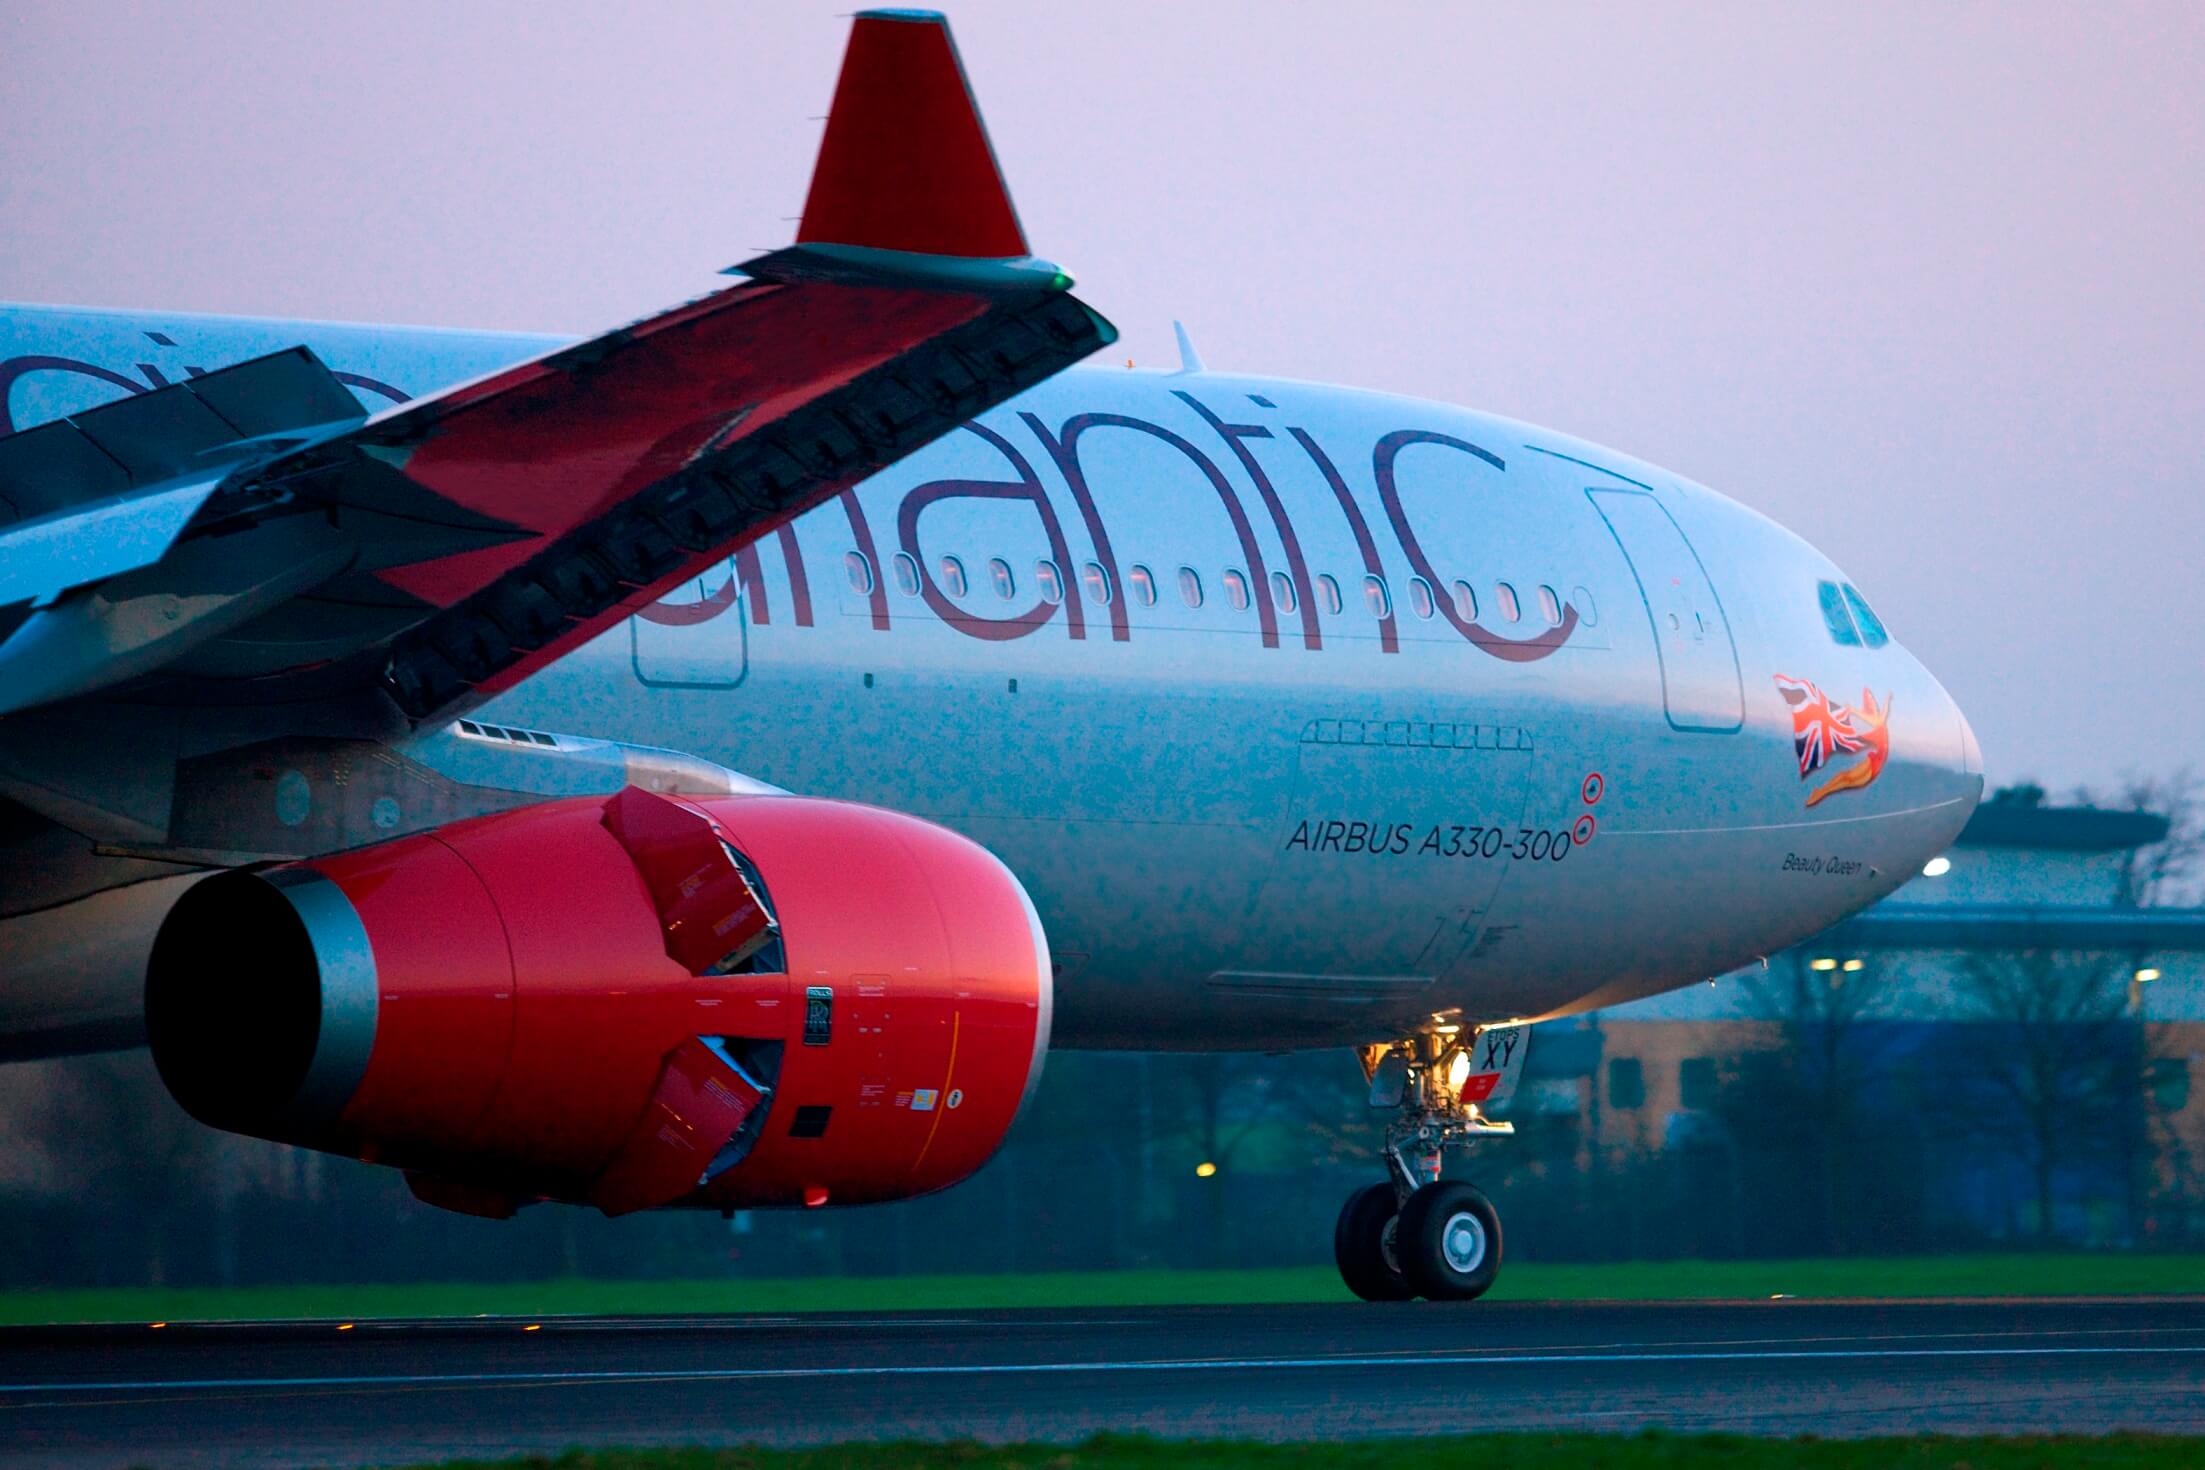 Virgin Atlantic, Air France and KLM launch their first codeshare partnership